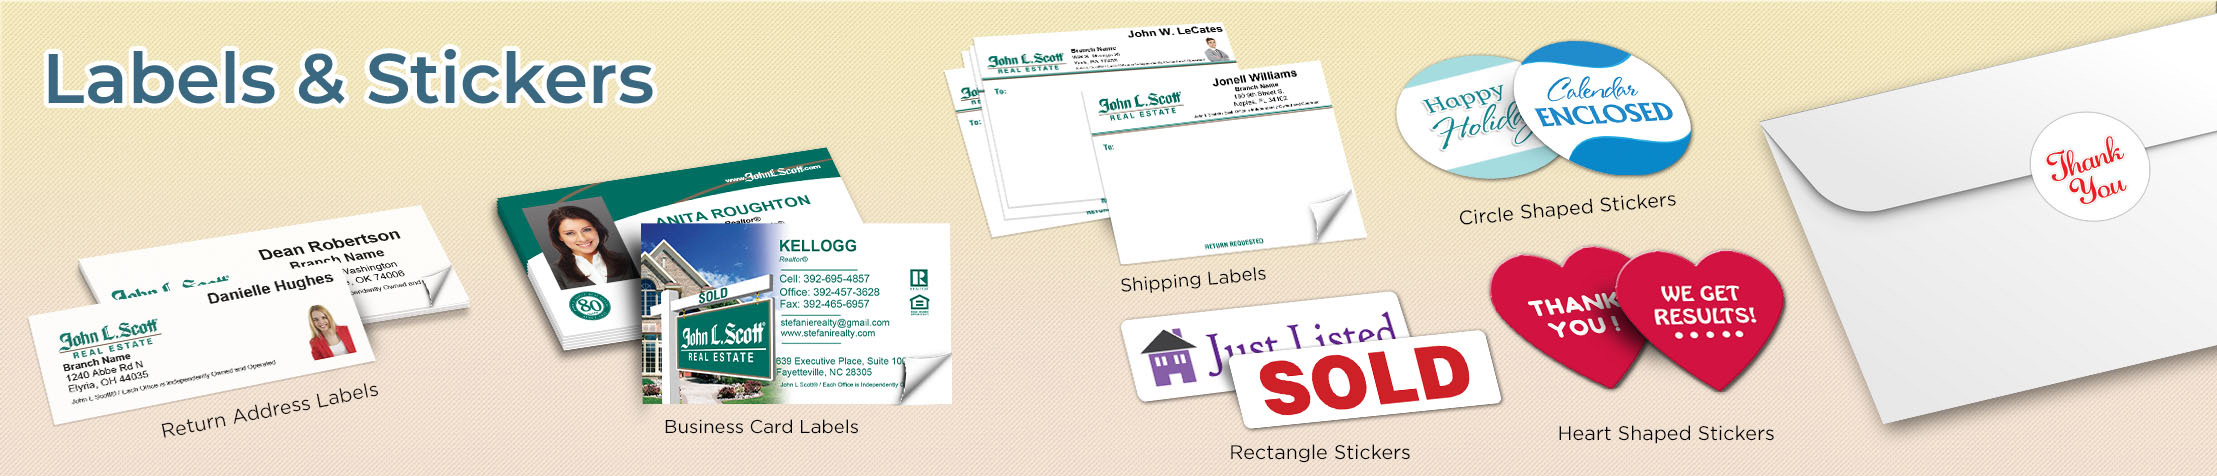 John L. Scott Real Estate Labels and Stickers - John L. Scott Real Estate business card labels, return address labels, shipping labels, and assorted stickers | BestPrintBuy.com